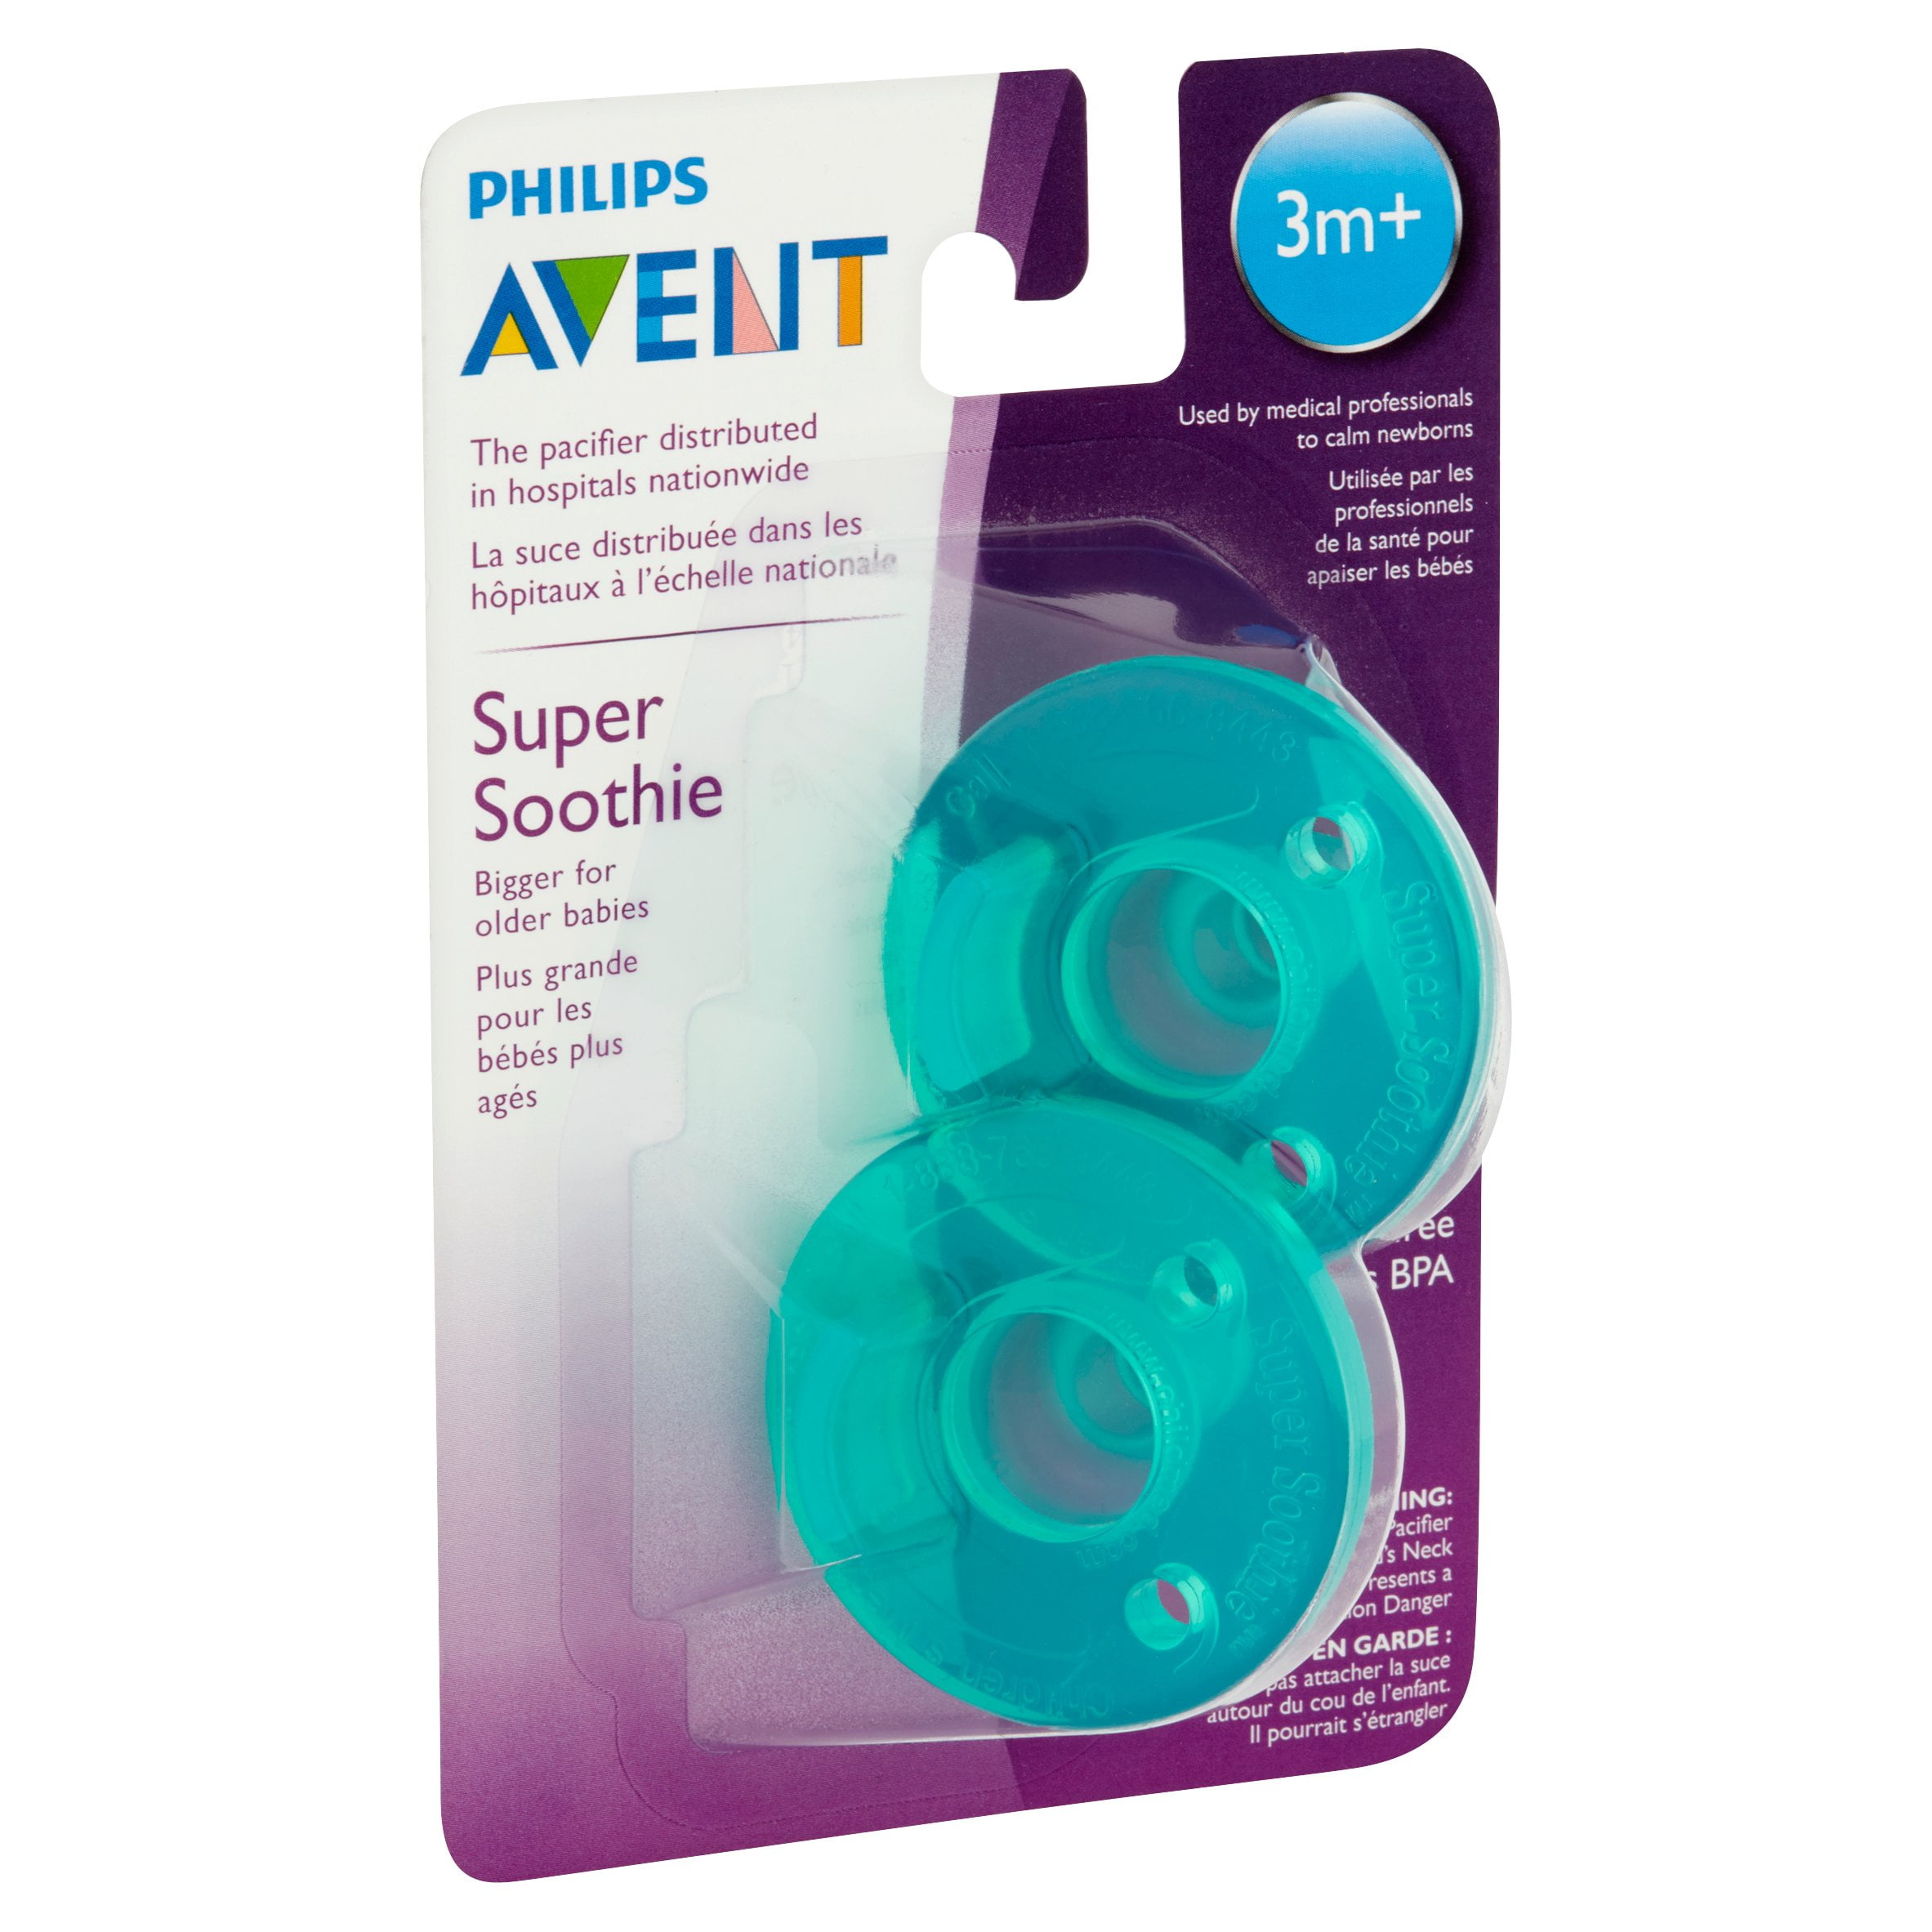 avent pacifier price